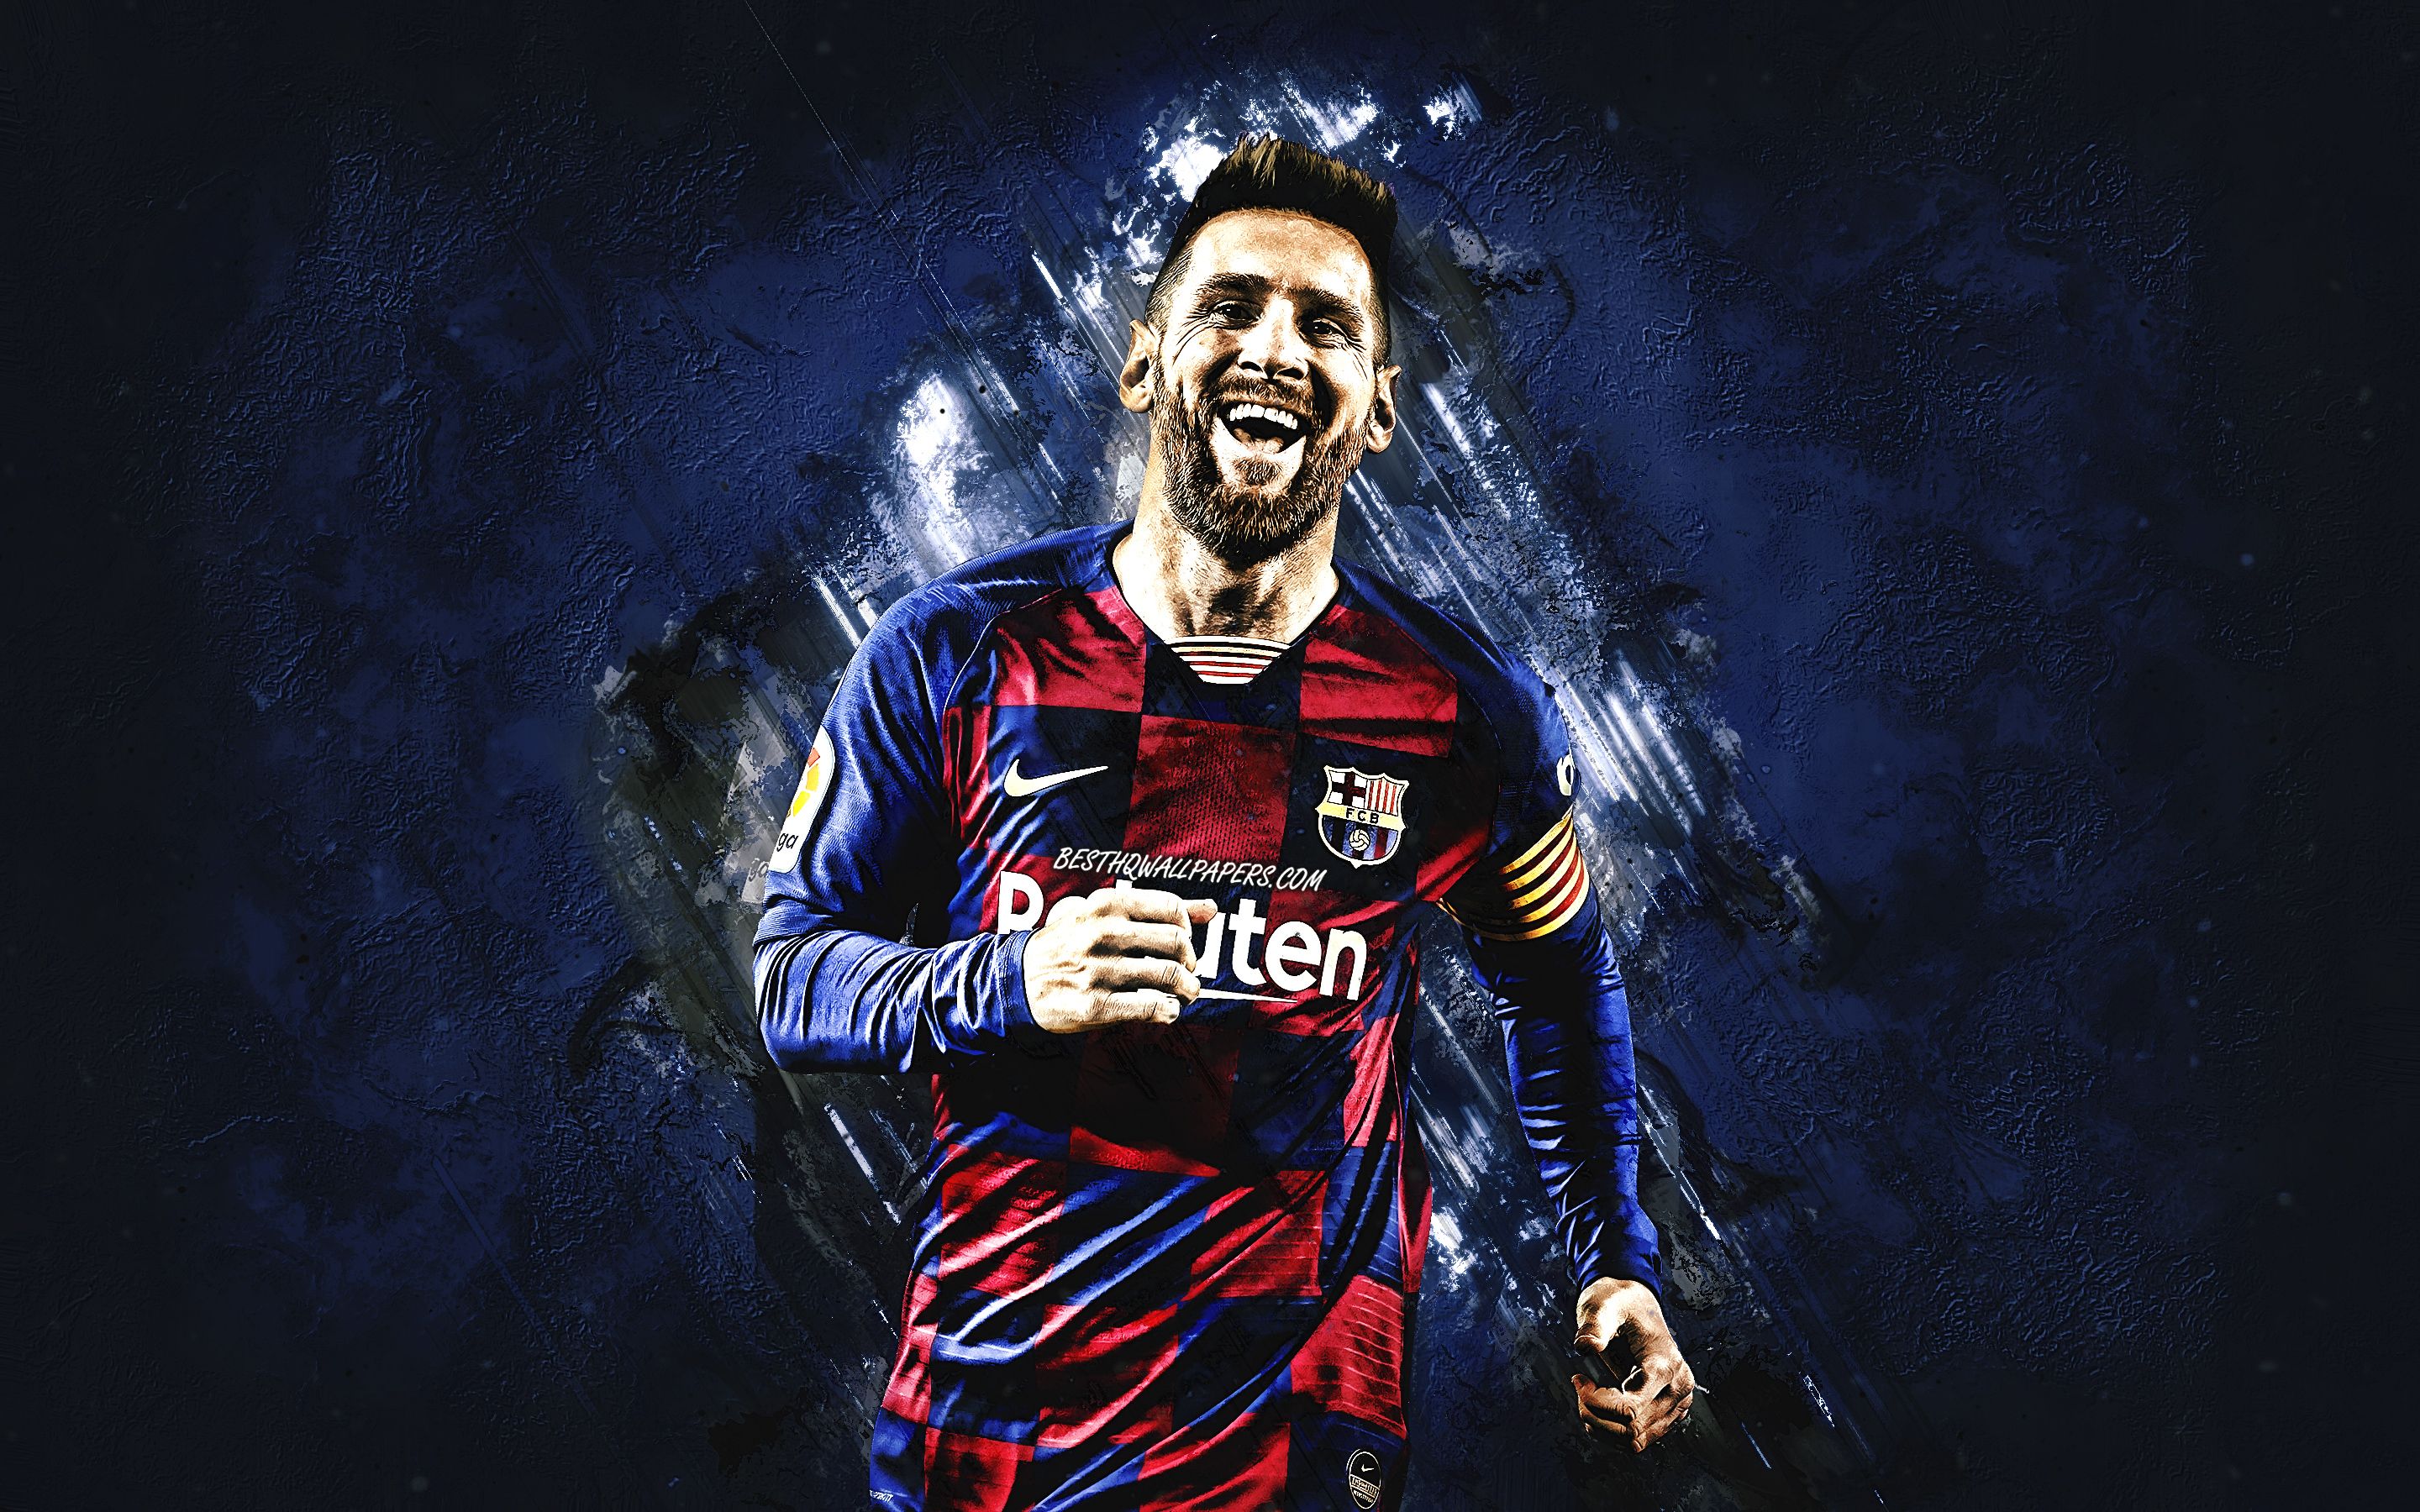 Download wallpaper Lionel Messi, portrait, Barcelona FC, Catalan football club, Champions League, world football star, blue stone background, creative art, Leo Messi for desktop with resolution 2880x1800. High Quality HD picture wallpaper